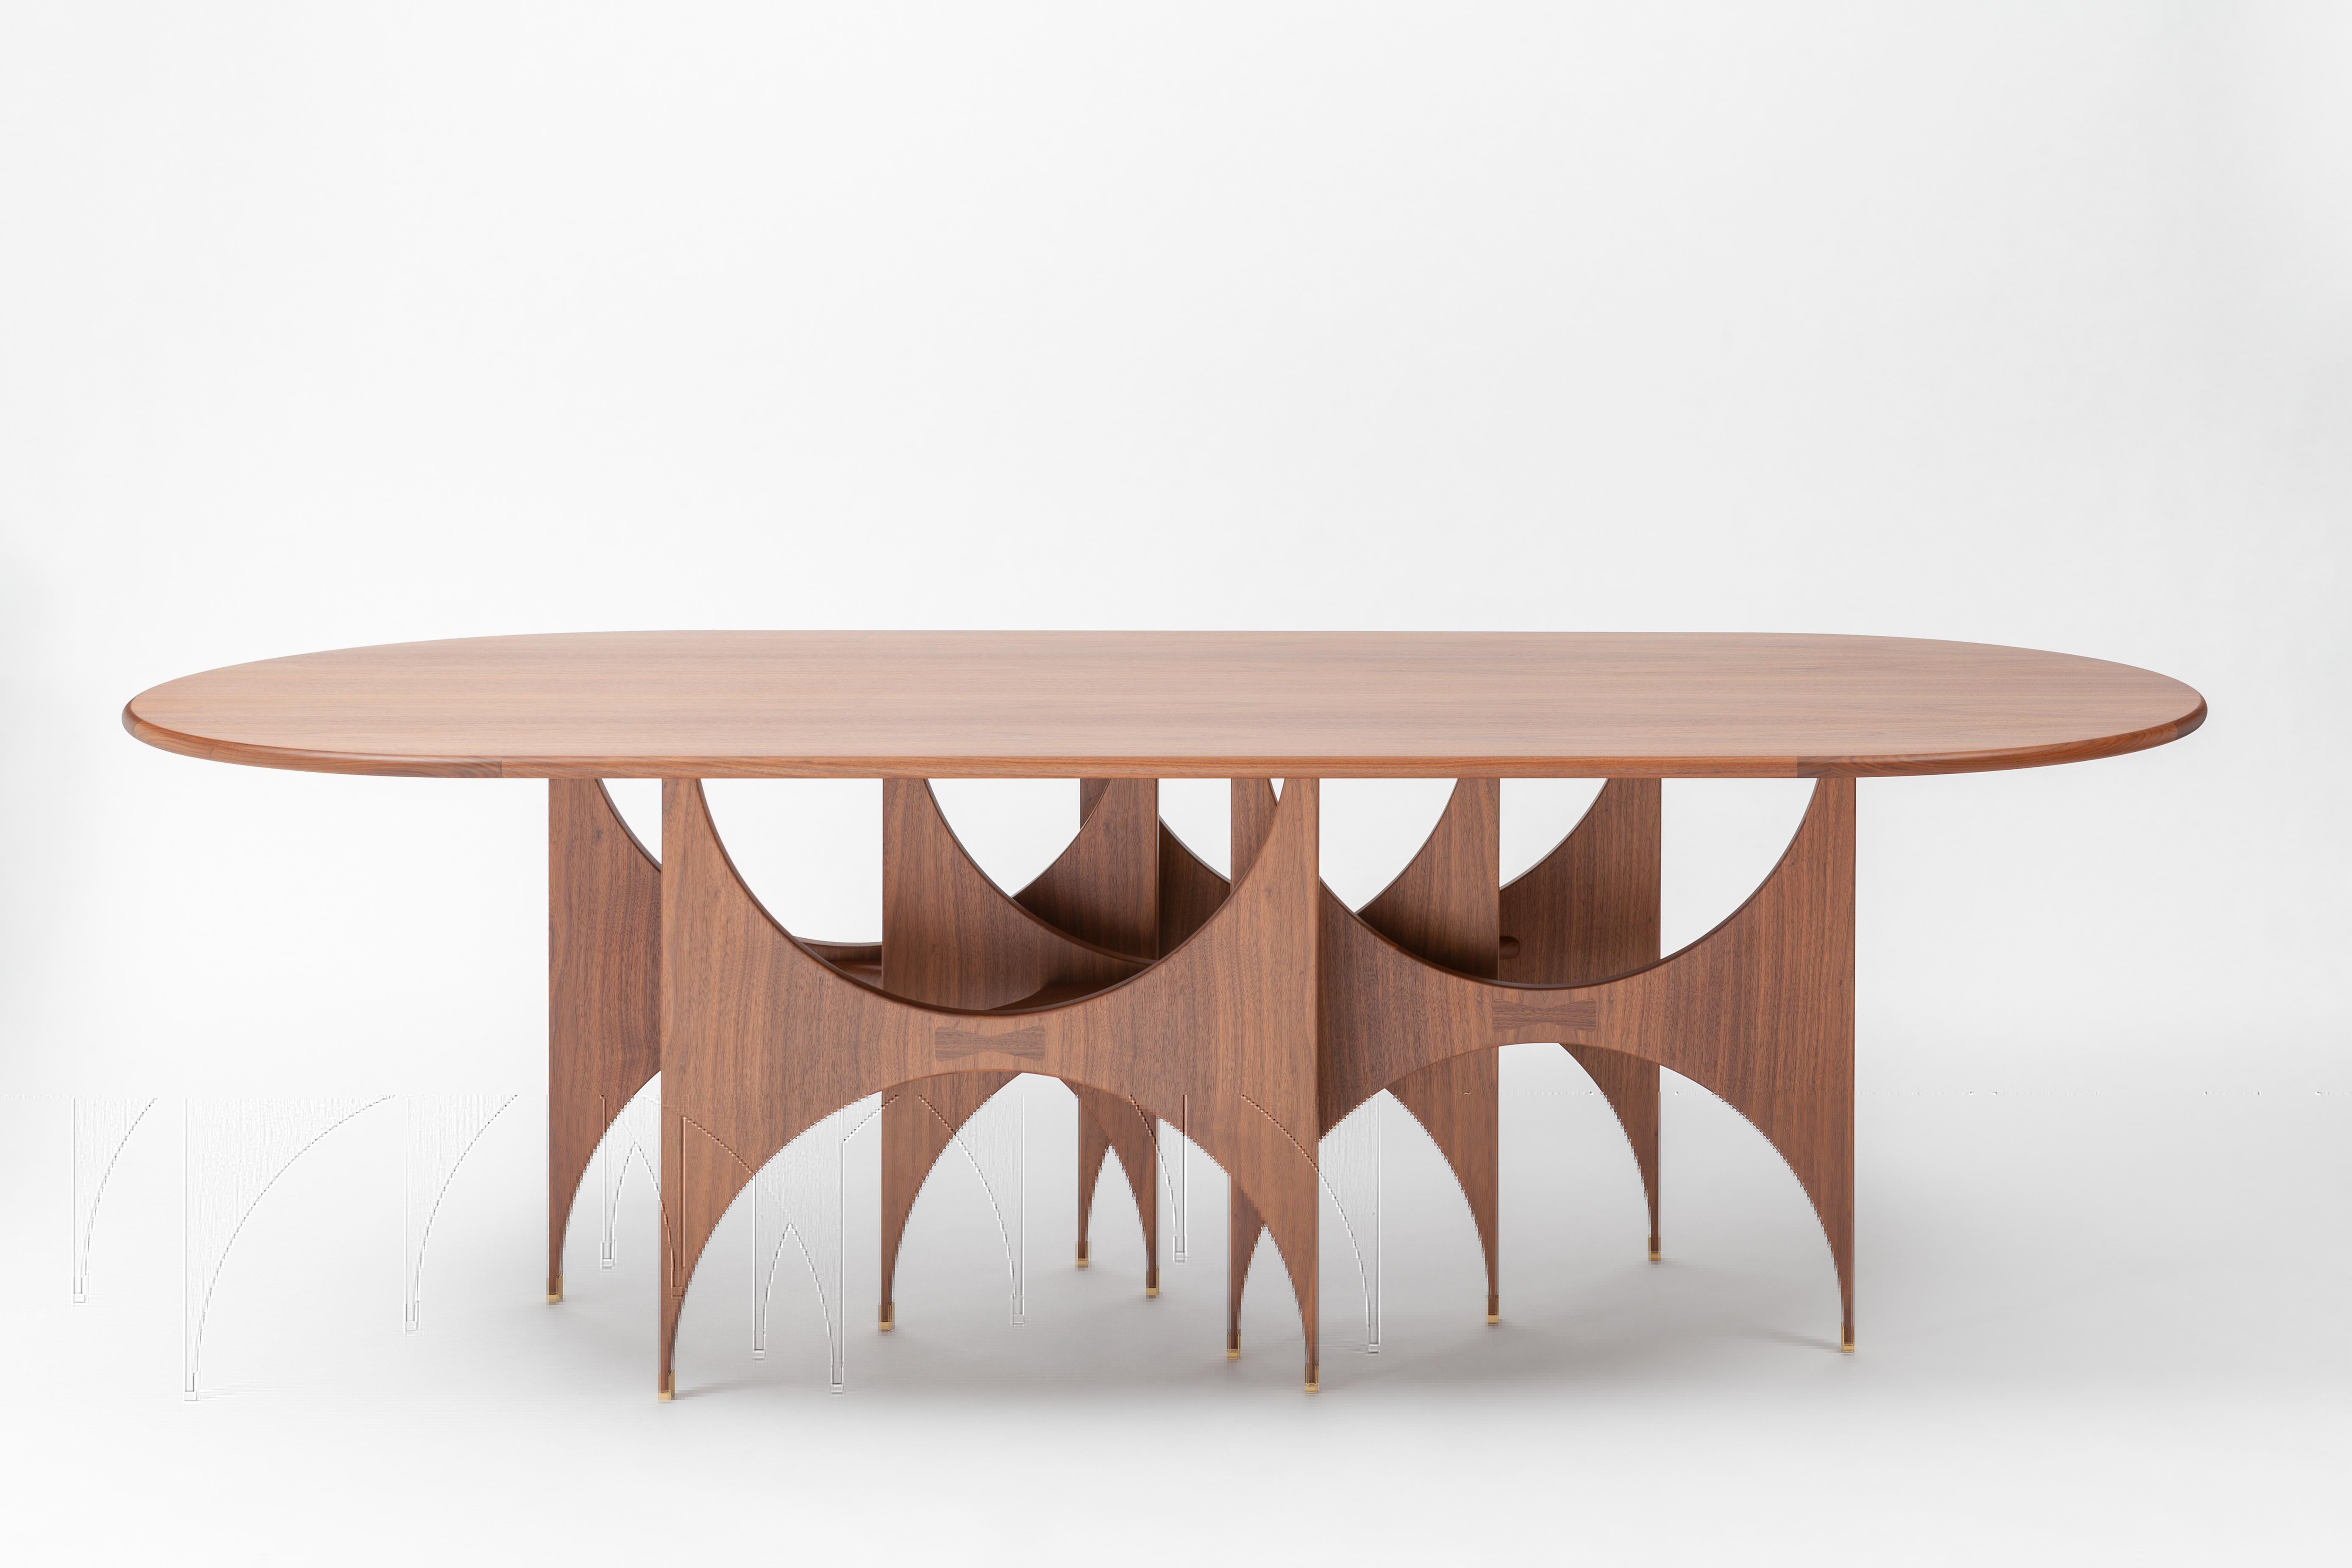 Butterfly walnut oblong table by SEM
Dimensions: D250 x W110 x H78.5 cm
Material: Solid natural walnut base and top.
Costumized sizes, colors and top available on request. Top Available min: 220cm and max: 270cm.

The 'Butterfly in the dining